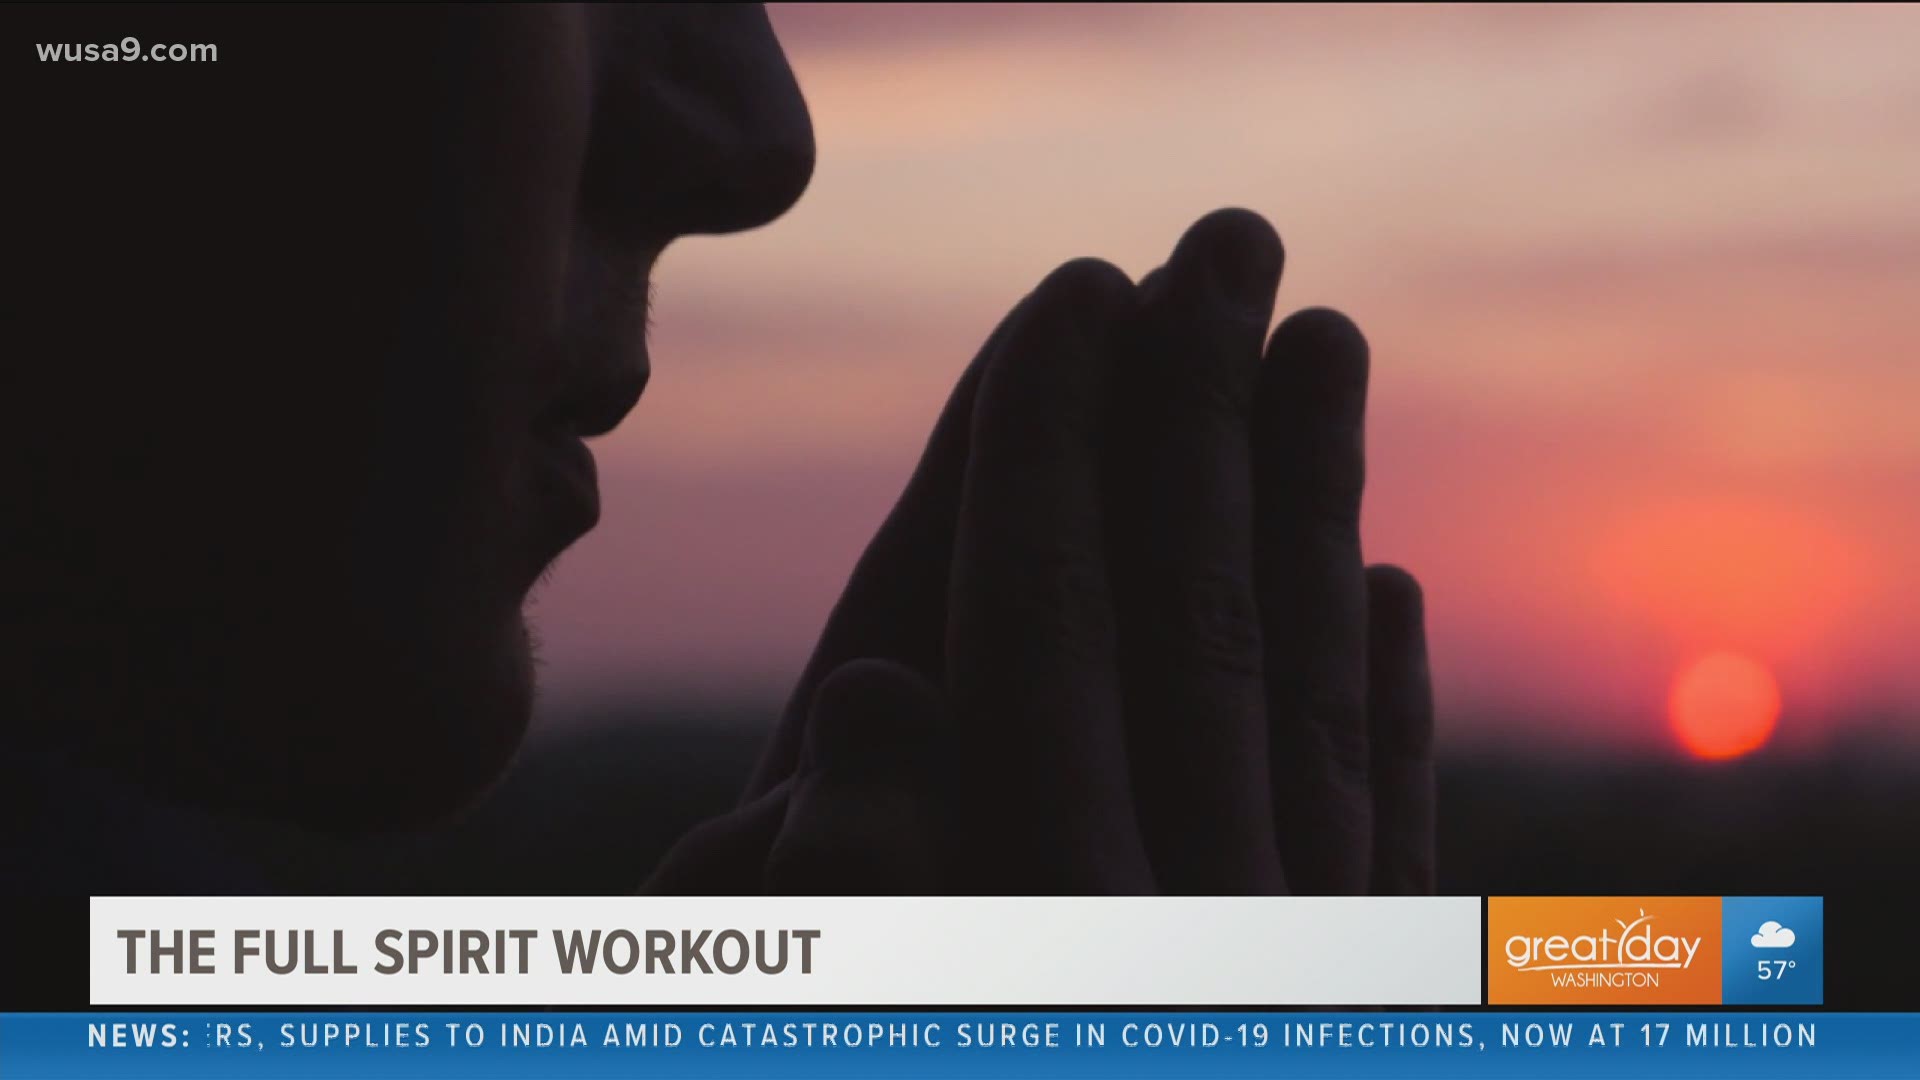 Author and mindfulness expert, Kate Eckman shares some tips on how to do a full spirit workout.